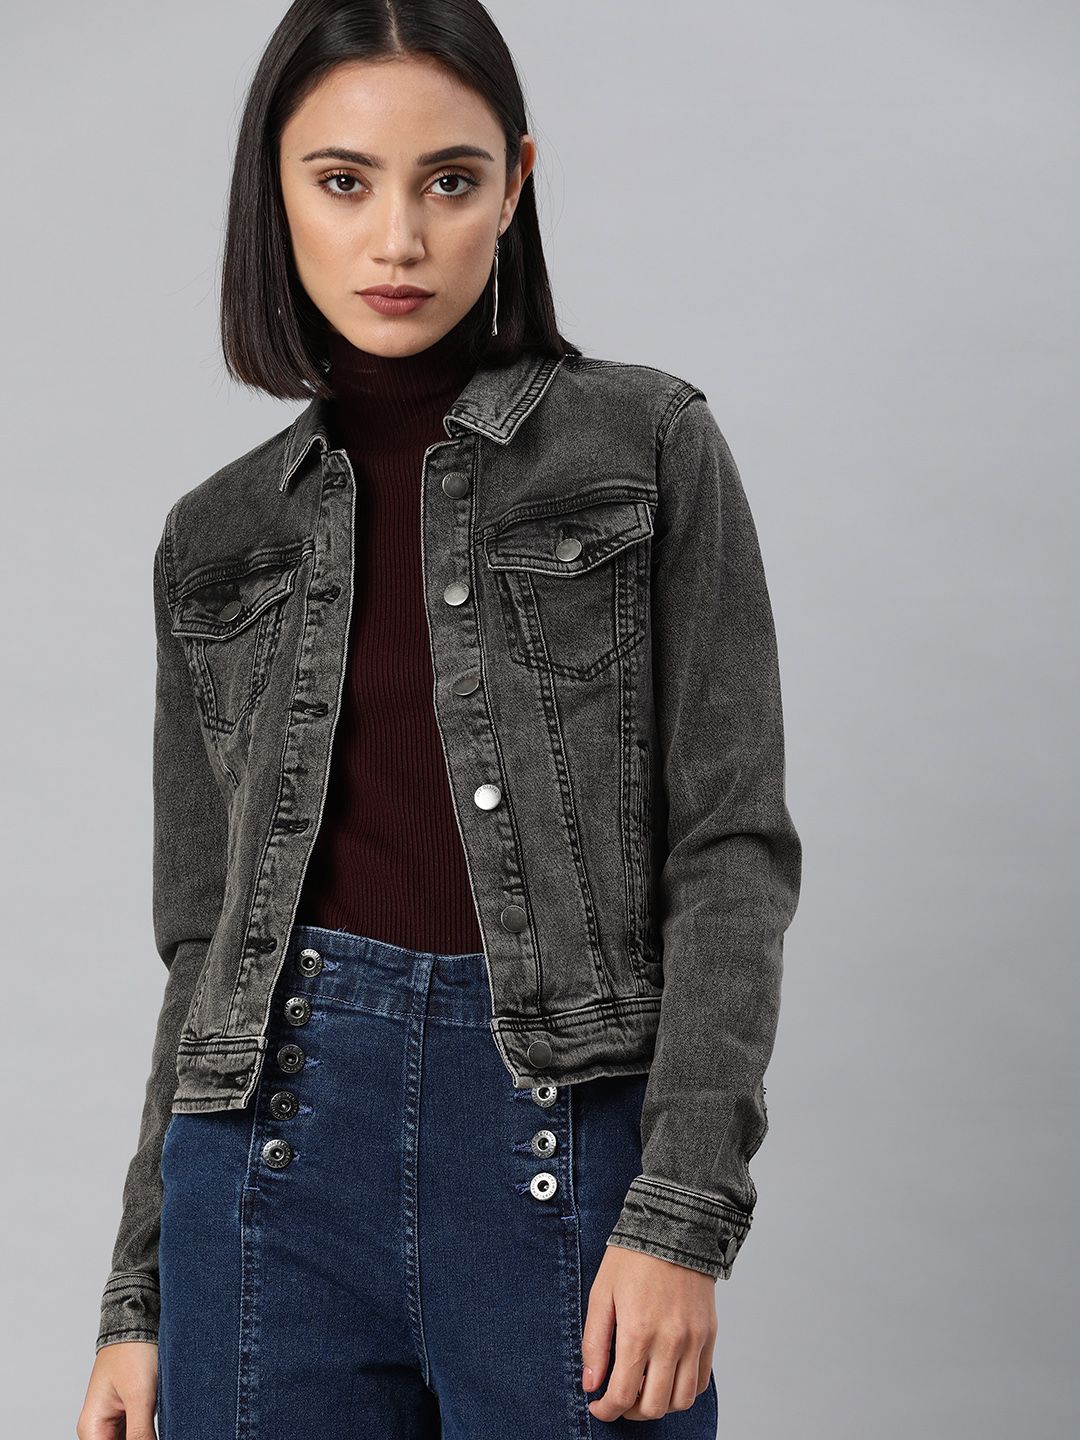 ONLY Women Grey Solid Denim Jacket Price in India